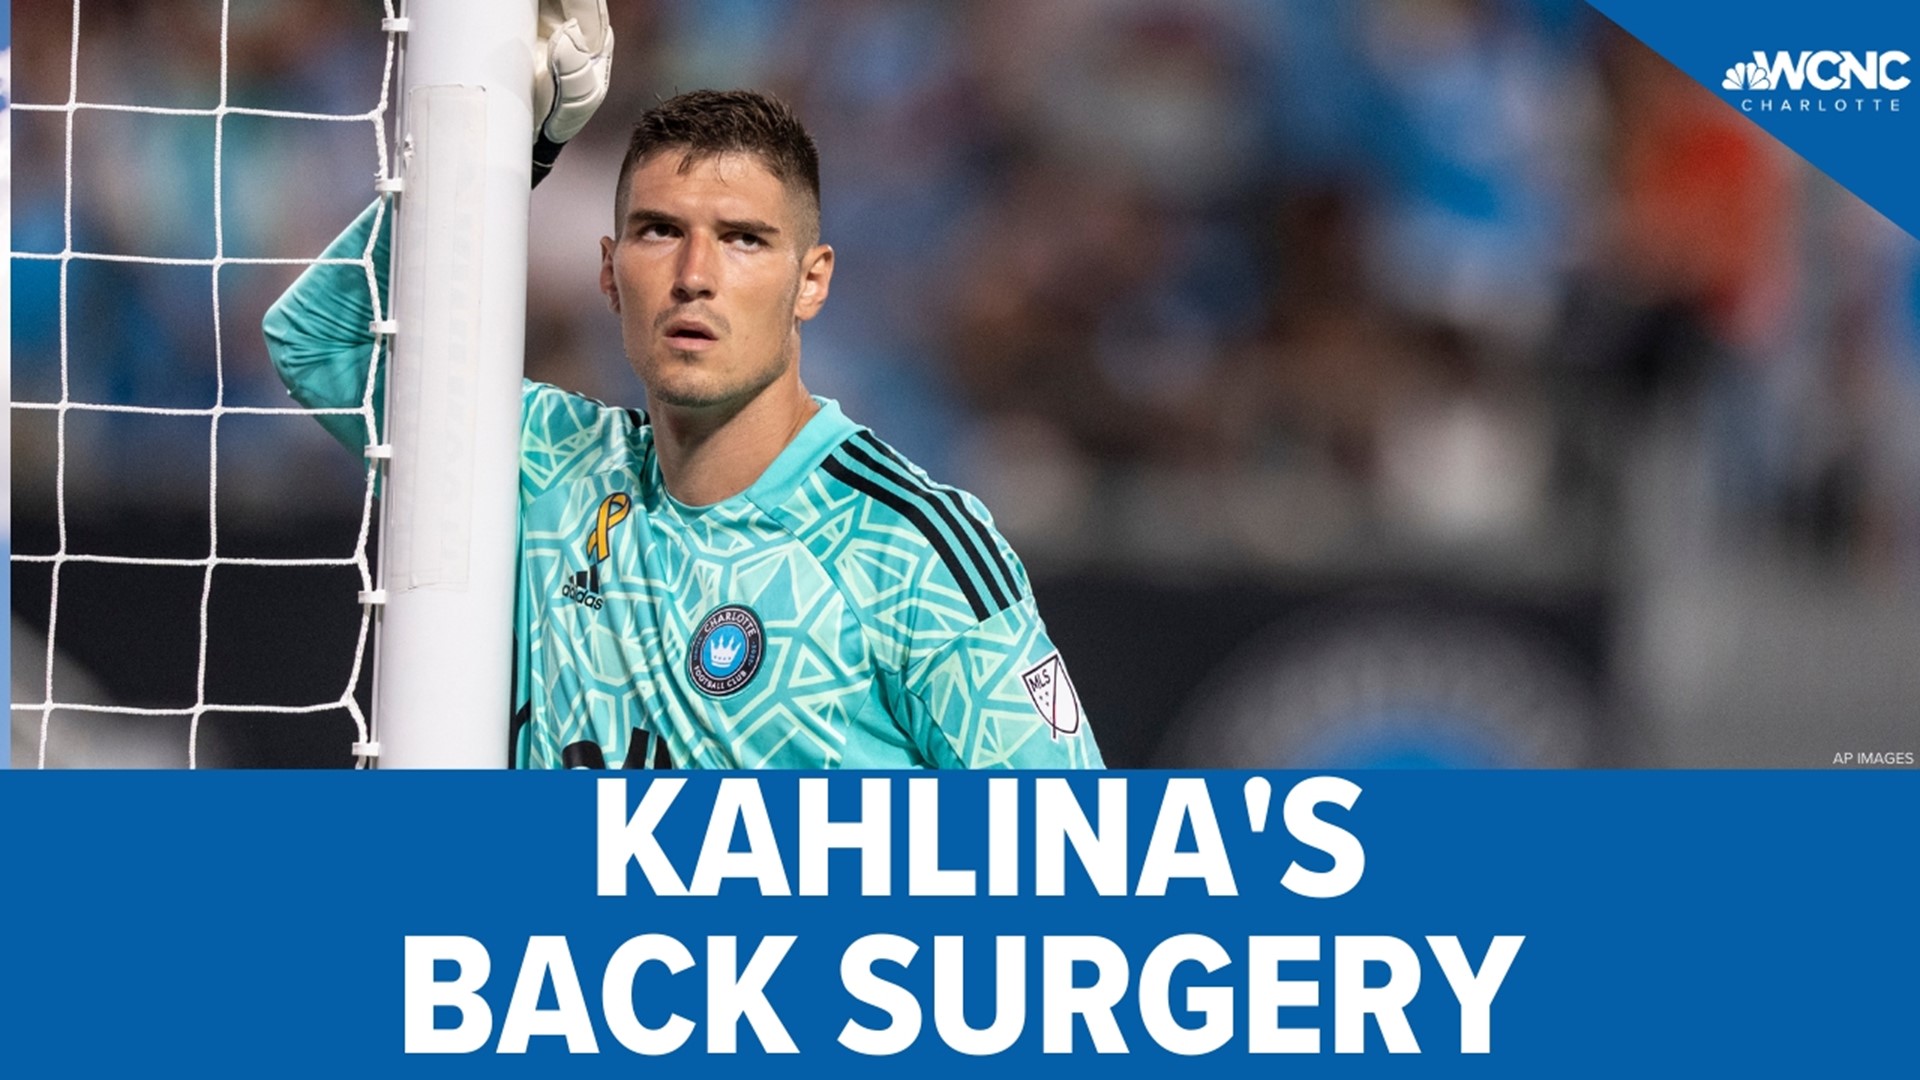 Charlotte FC confirmed goalkeeper Kristijan Kahlina has had back surgery. They say he is expected to make a full recovery.